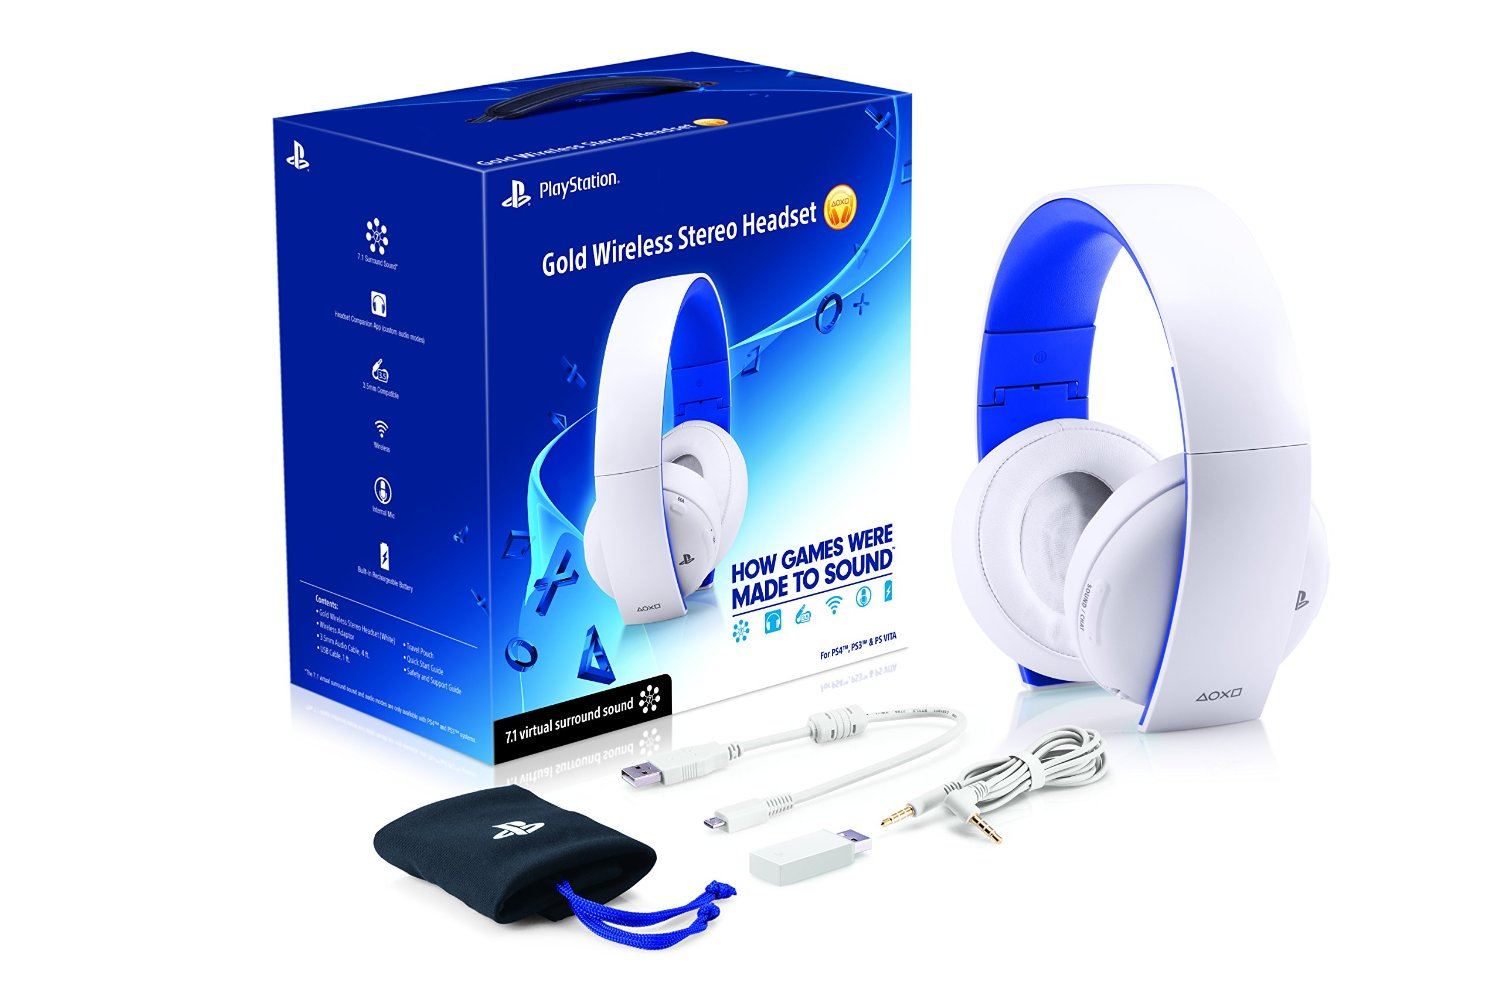 Playstation Gold Wireless Stereo Headset 2.0 (Glacier White) for PlayStation Vita, PlayStation 4